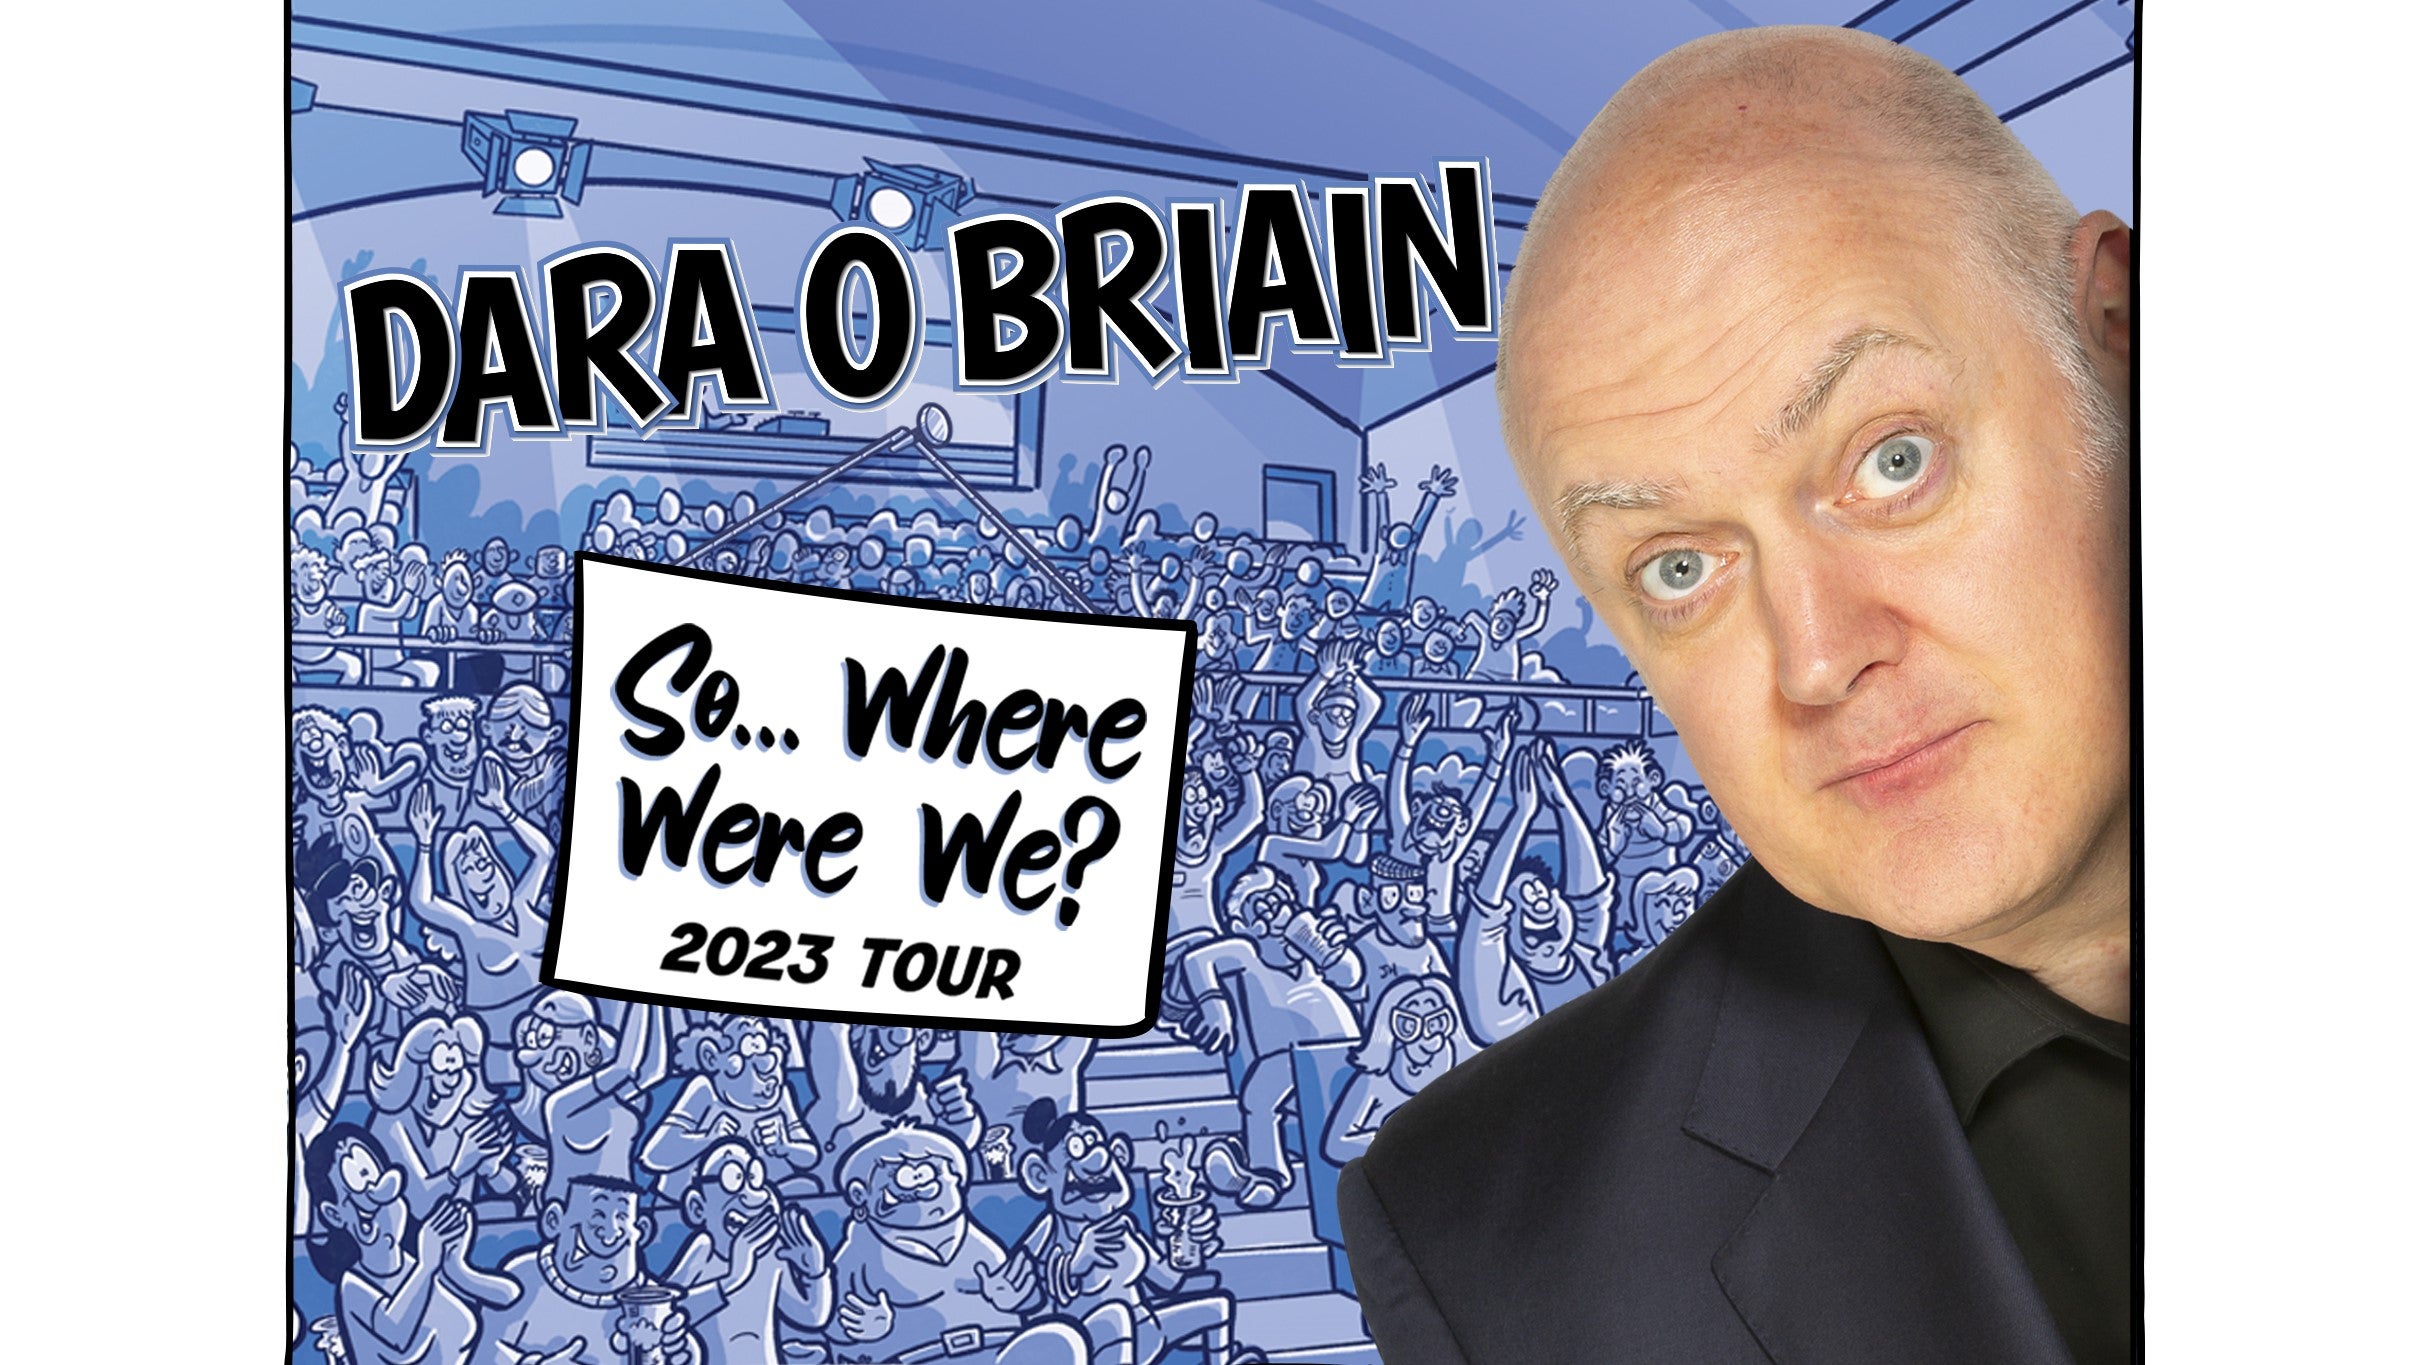 Image used with permission from Ticketmaster | Dara OBriain - So...Where Were We? tickets